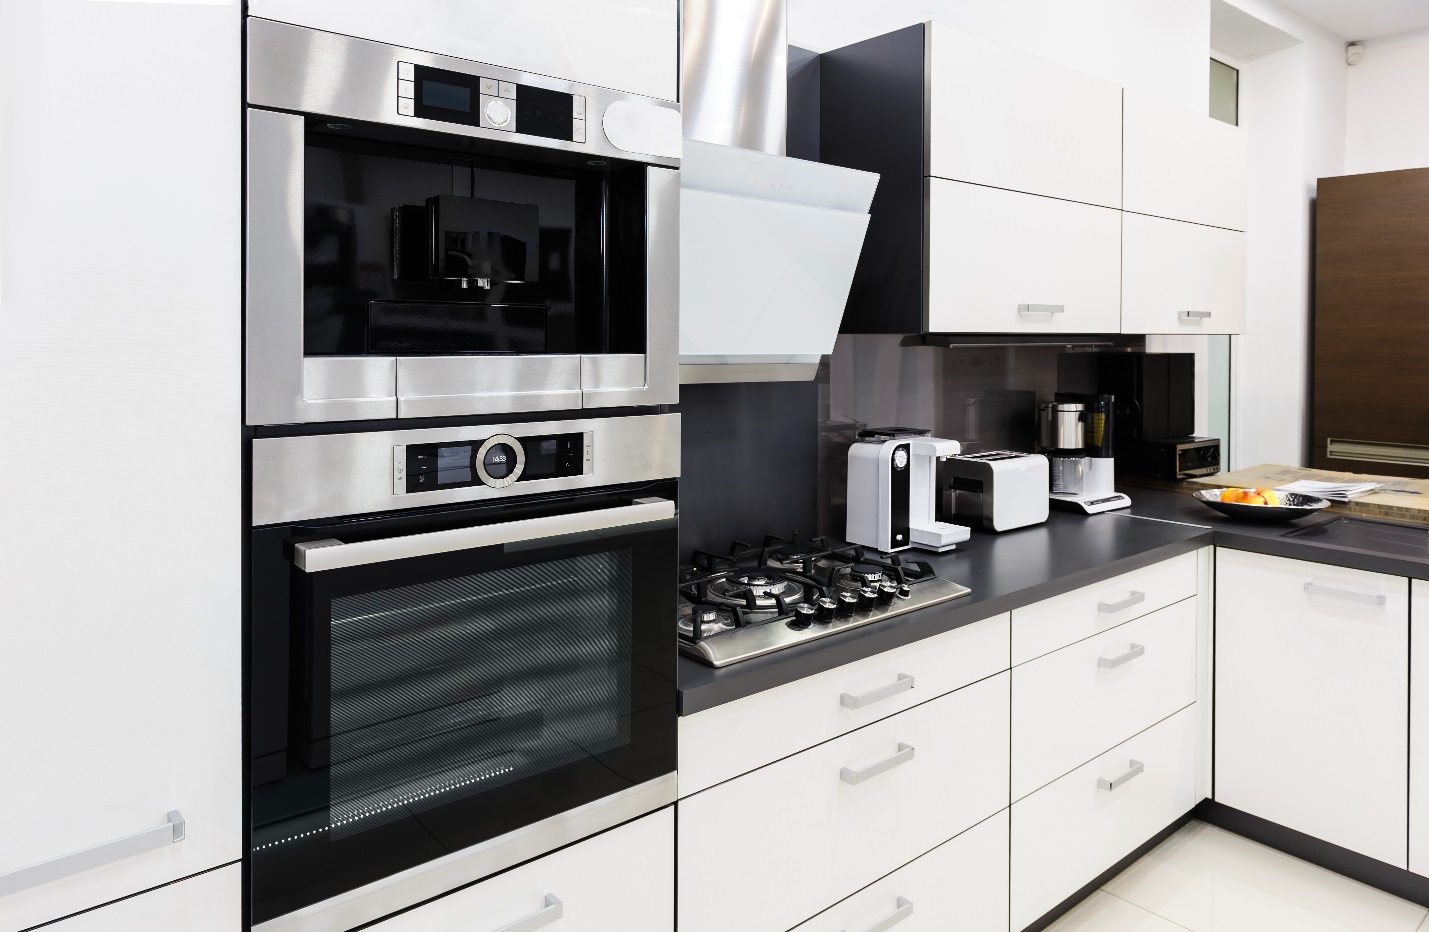 Kitchen Appliances and Accessories That Are Fundamental